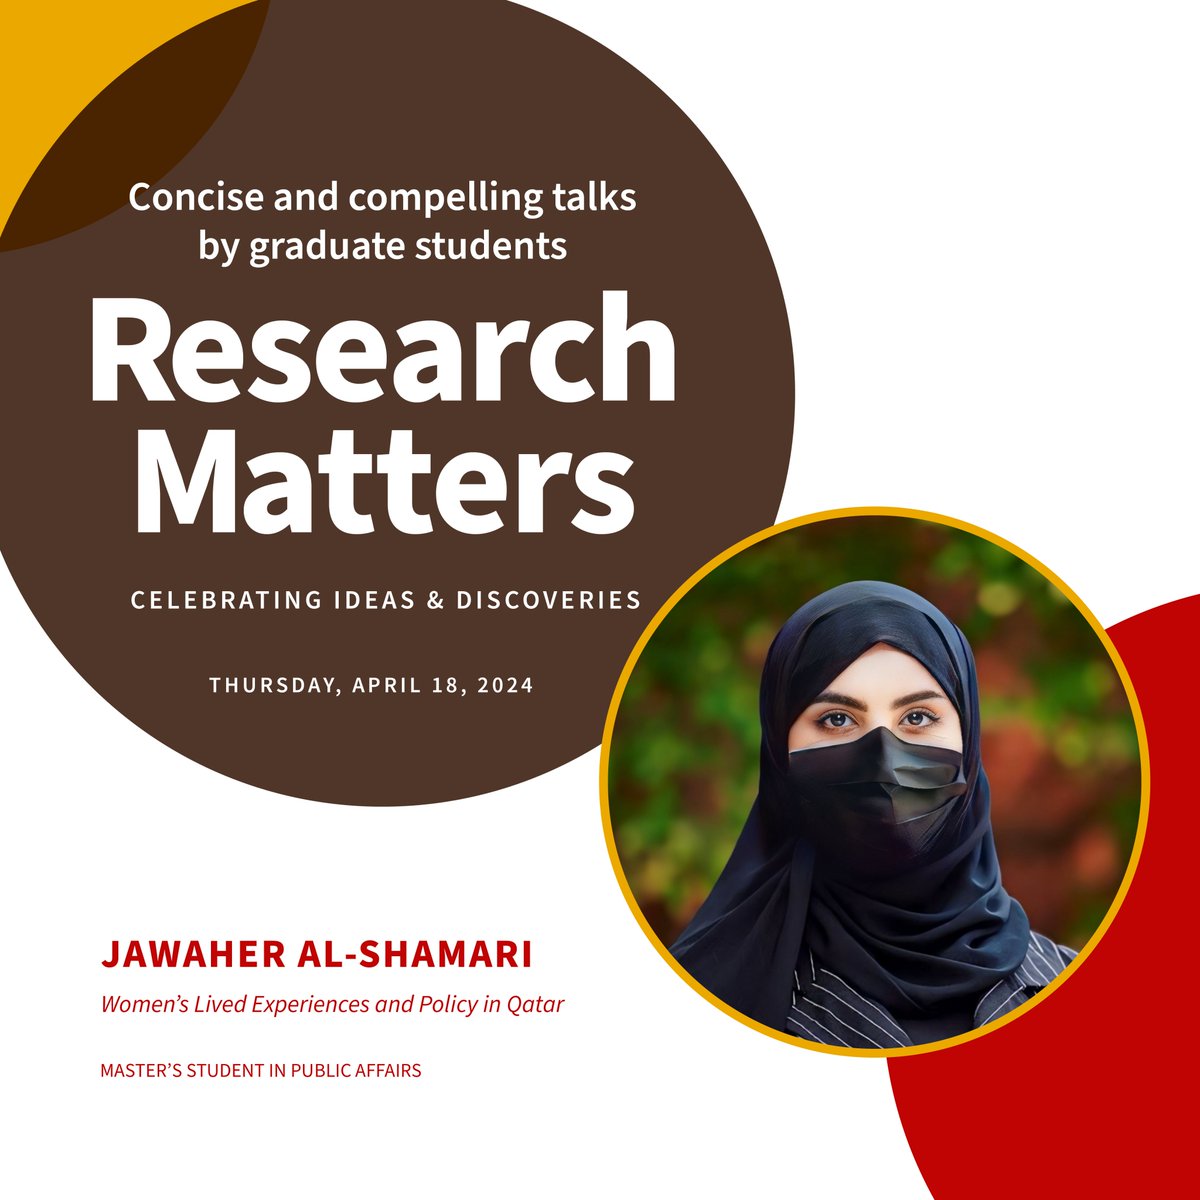 Introducing the 2024 Research Matters Speakers! Jawaher Al-Shamari, Master’s Student in Public Affairs presents: Women’s Lived Experiences and Policy in Qatar Join us on Thursday, April 18 at 4 pm at Grant Recital Hall graduateschool.brown.edu/research-matte… @WatsonInstitute